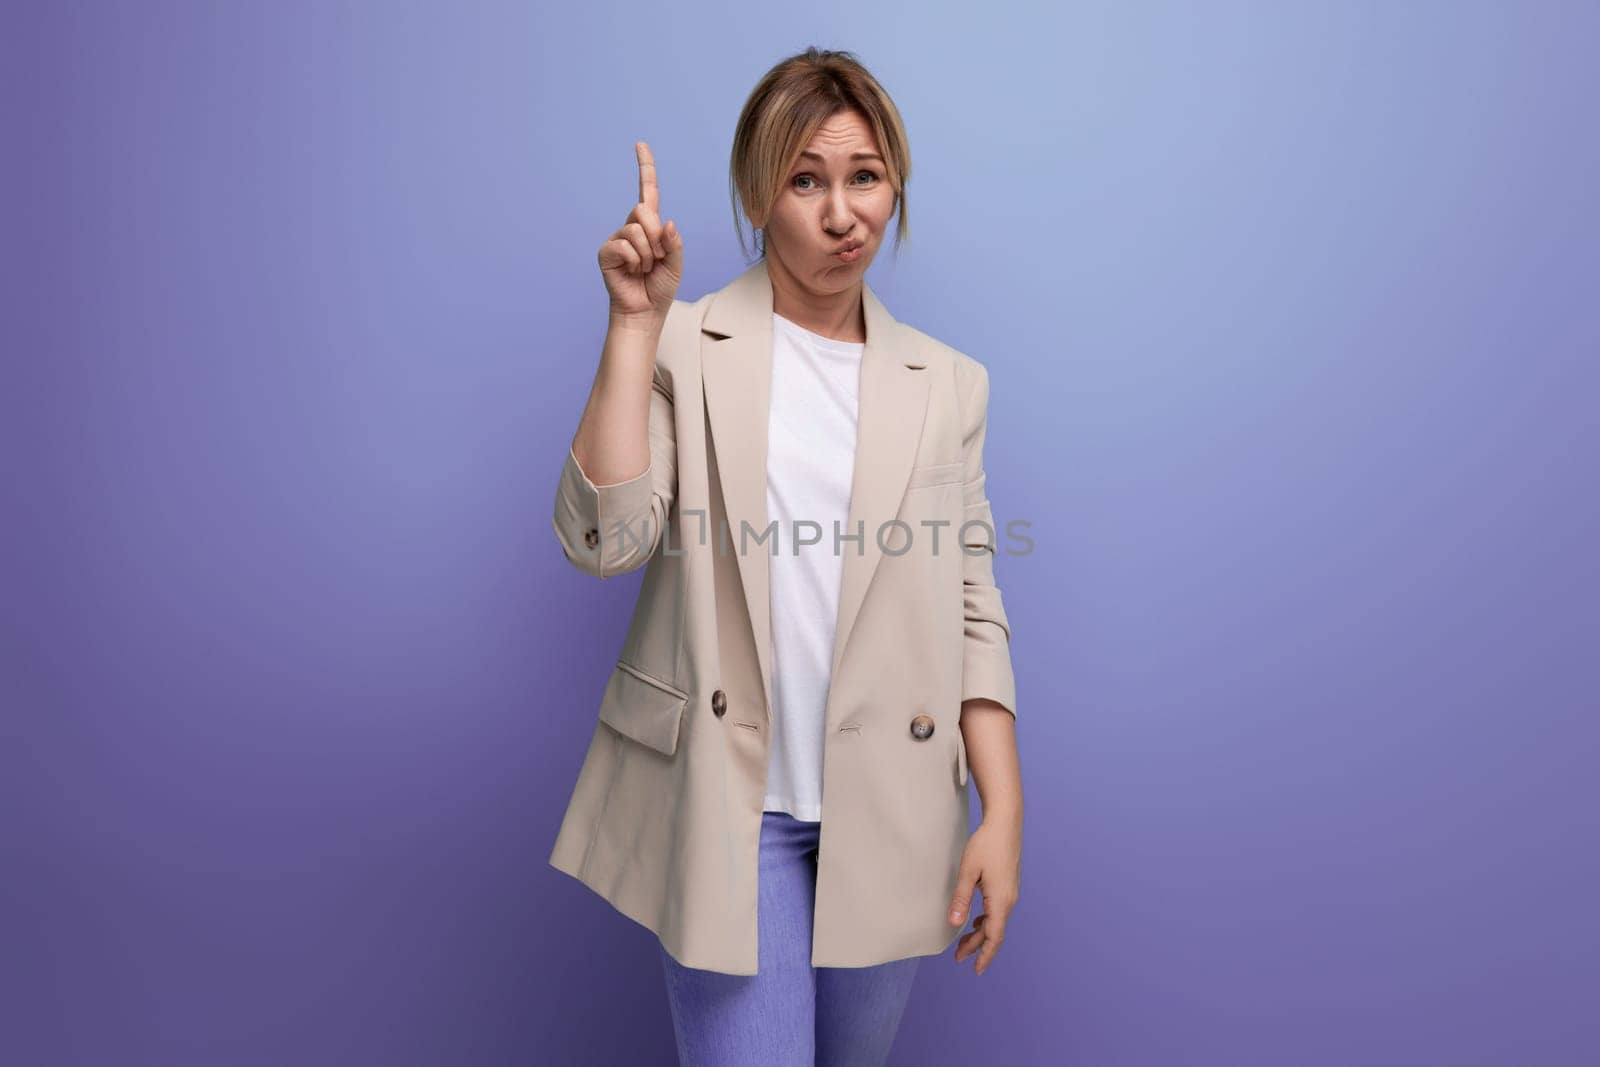 smart blond business young woman in jacket on studio background with copy space for advertising.